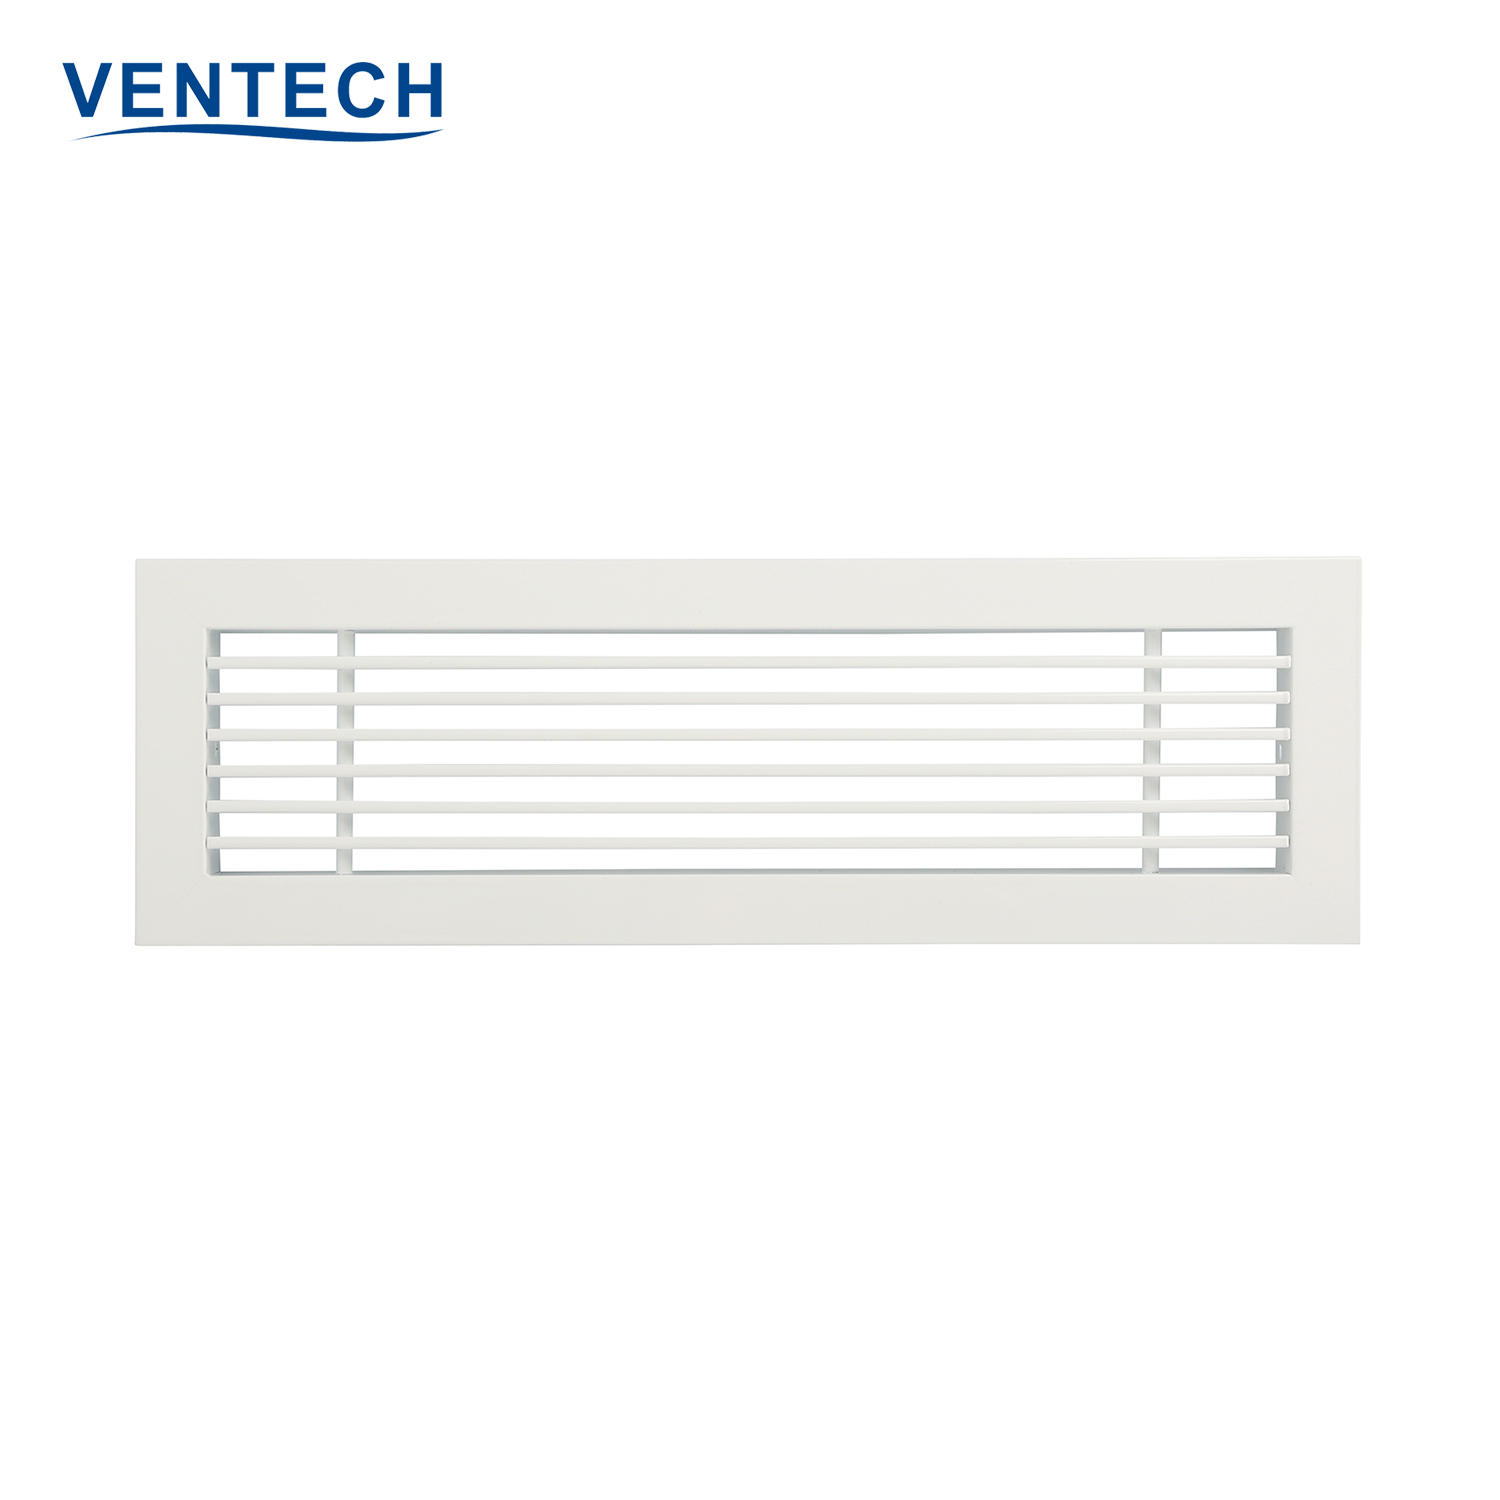 Adjustable Al Slot Removable Linear Grille Air Diffuser